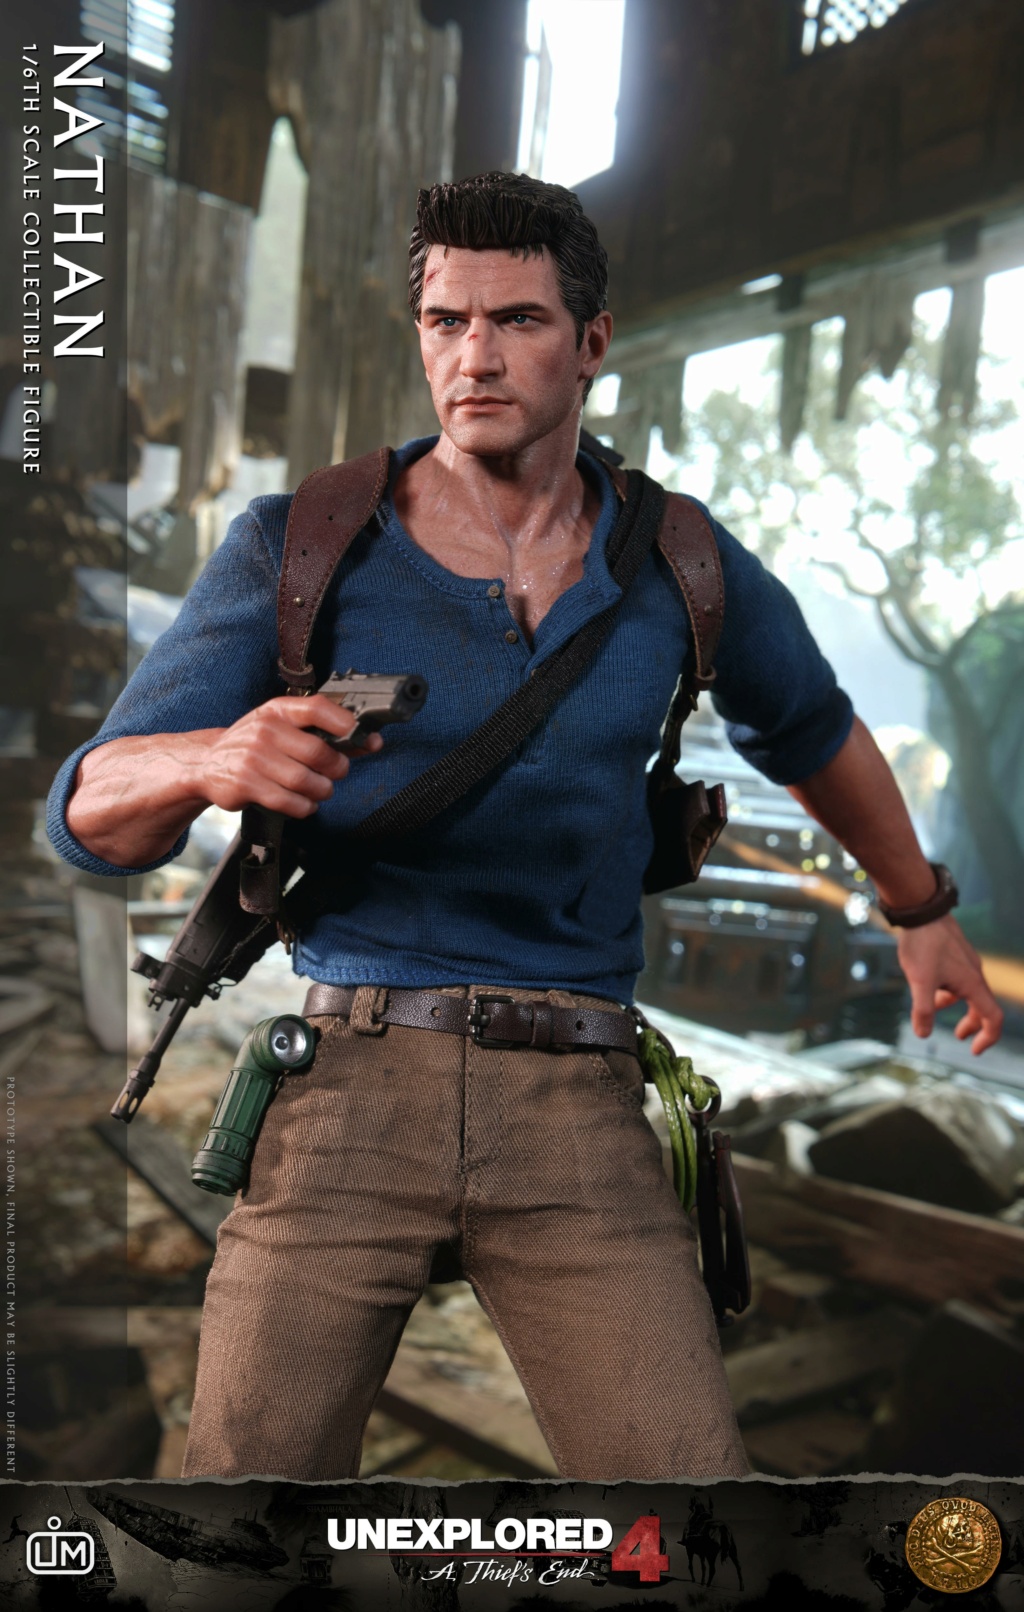 NEW PRODUCT: Limtoys: LIM012 1/6 Scale NATHAN -UNEXPLORED 4 43128710